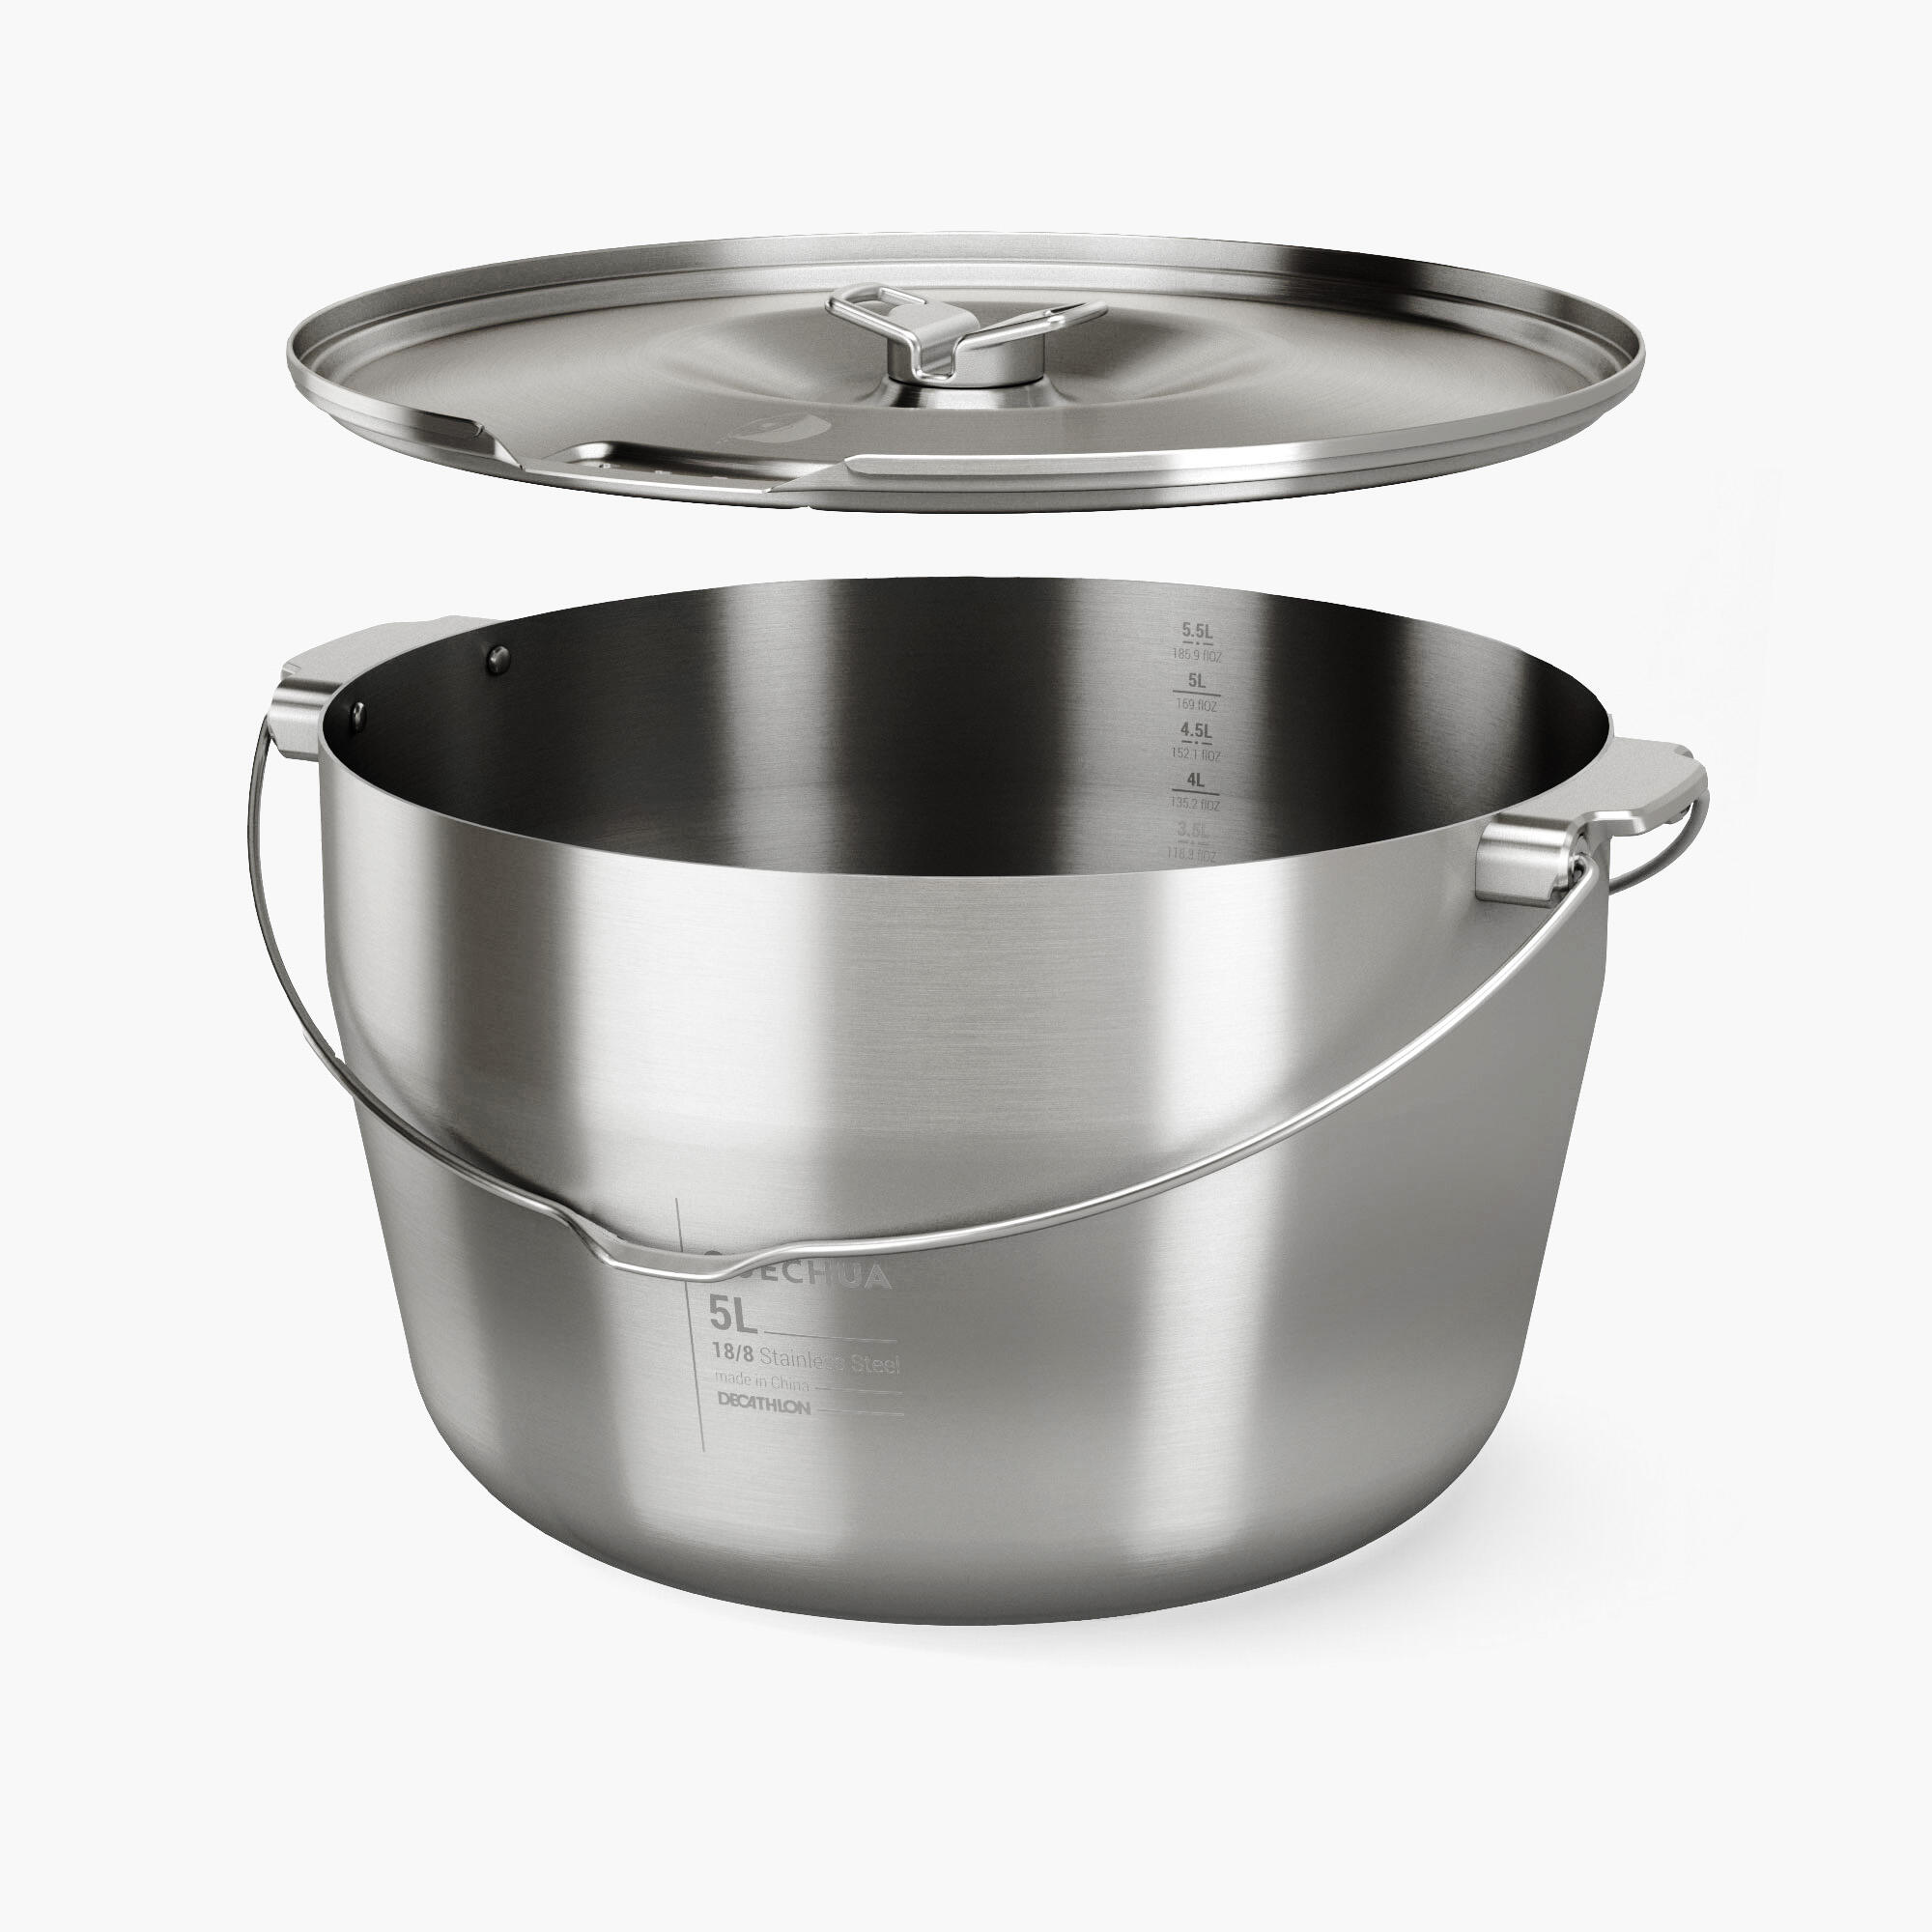 6-People Camping Cooking Pot - Stainless Steel - 5 Litres 8/9